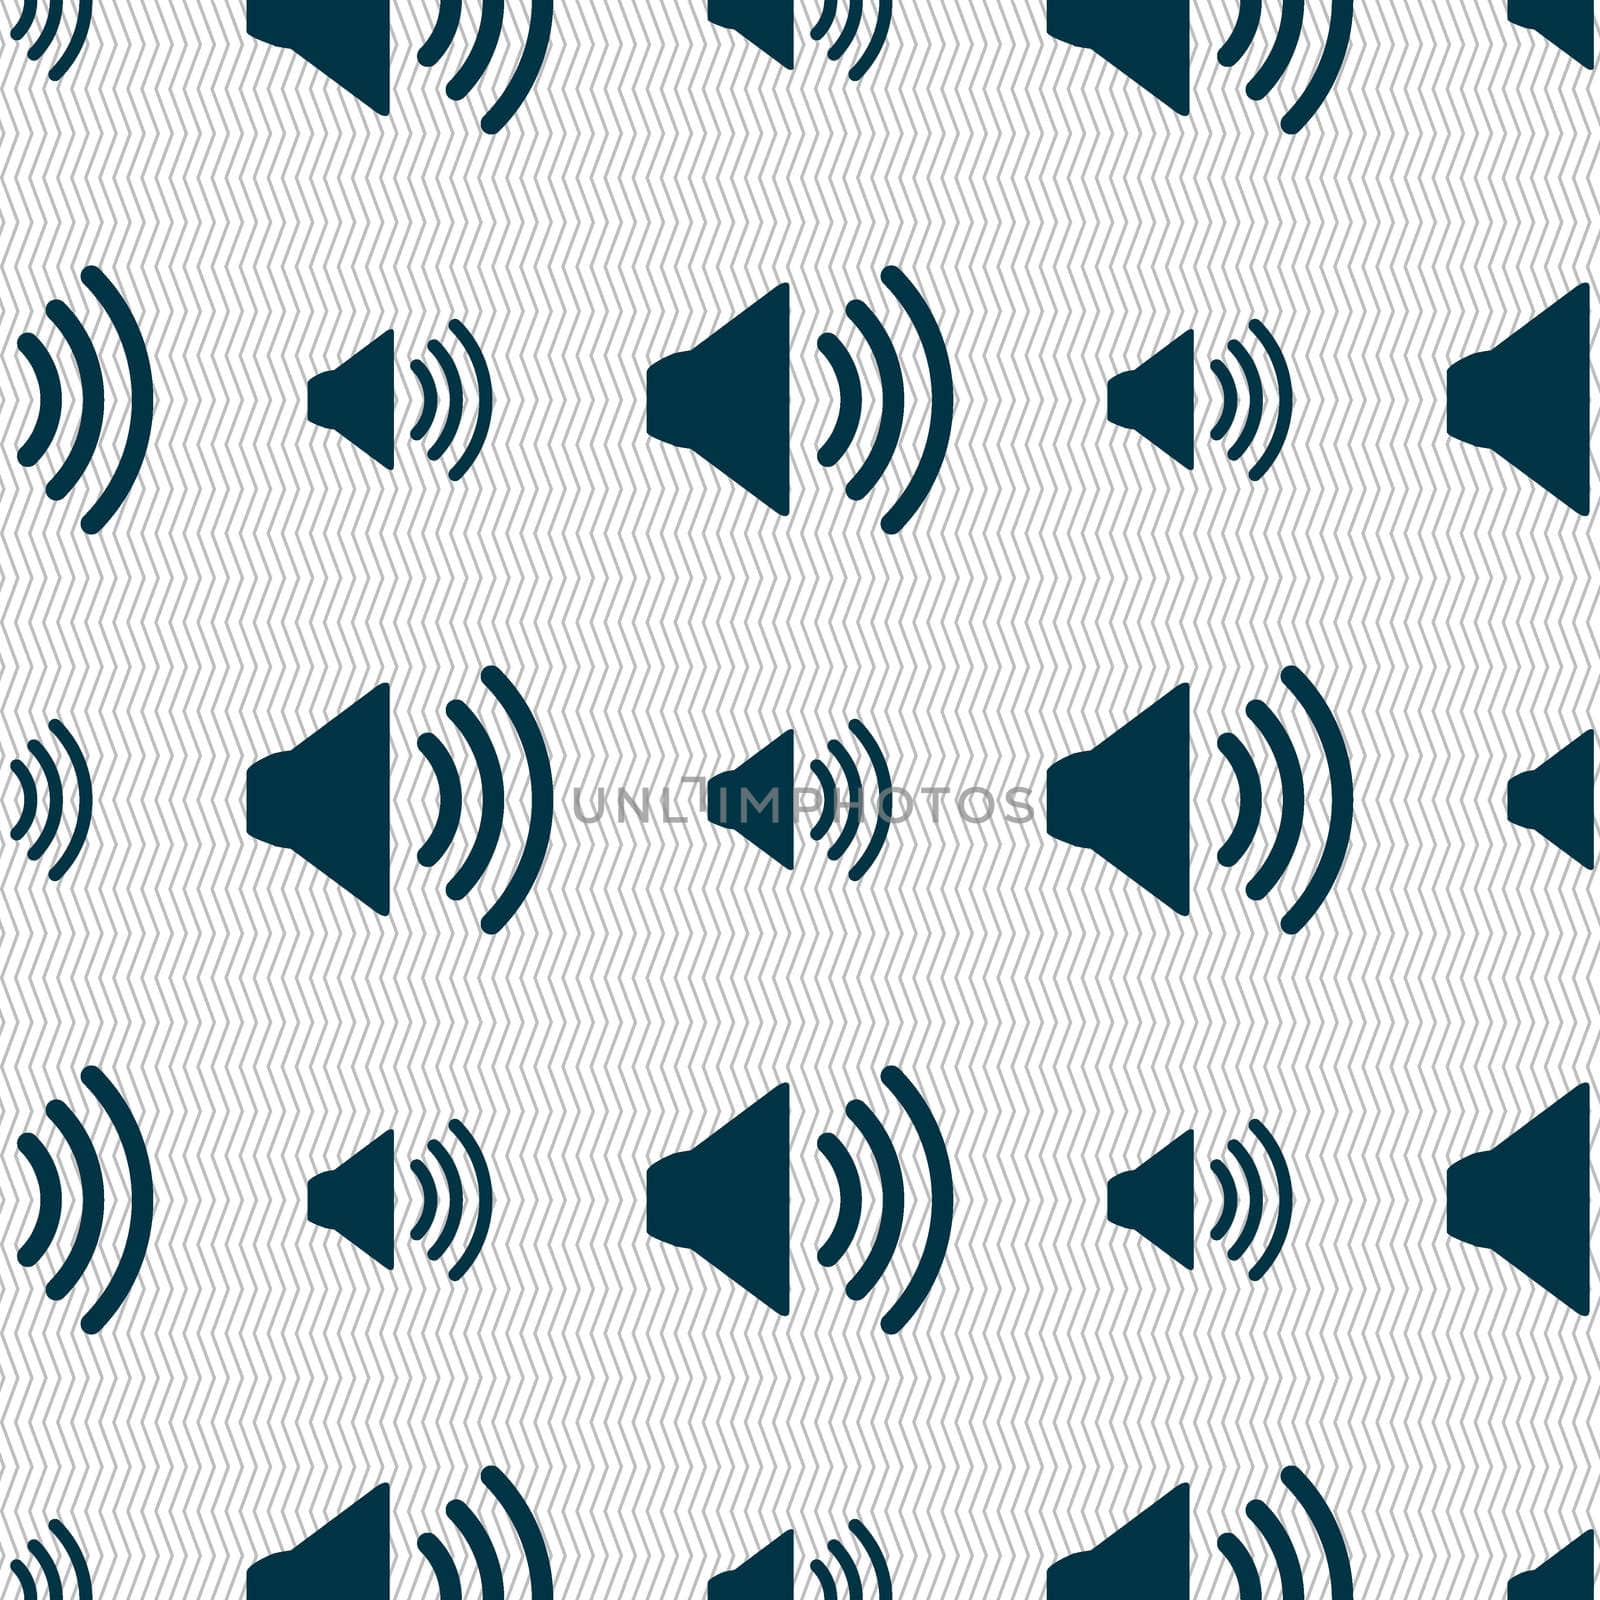 Speaker volume sign icon. Sound symbol. Seamless abstract background with geometric shapes. illustration